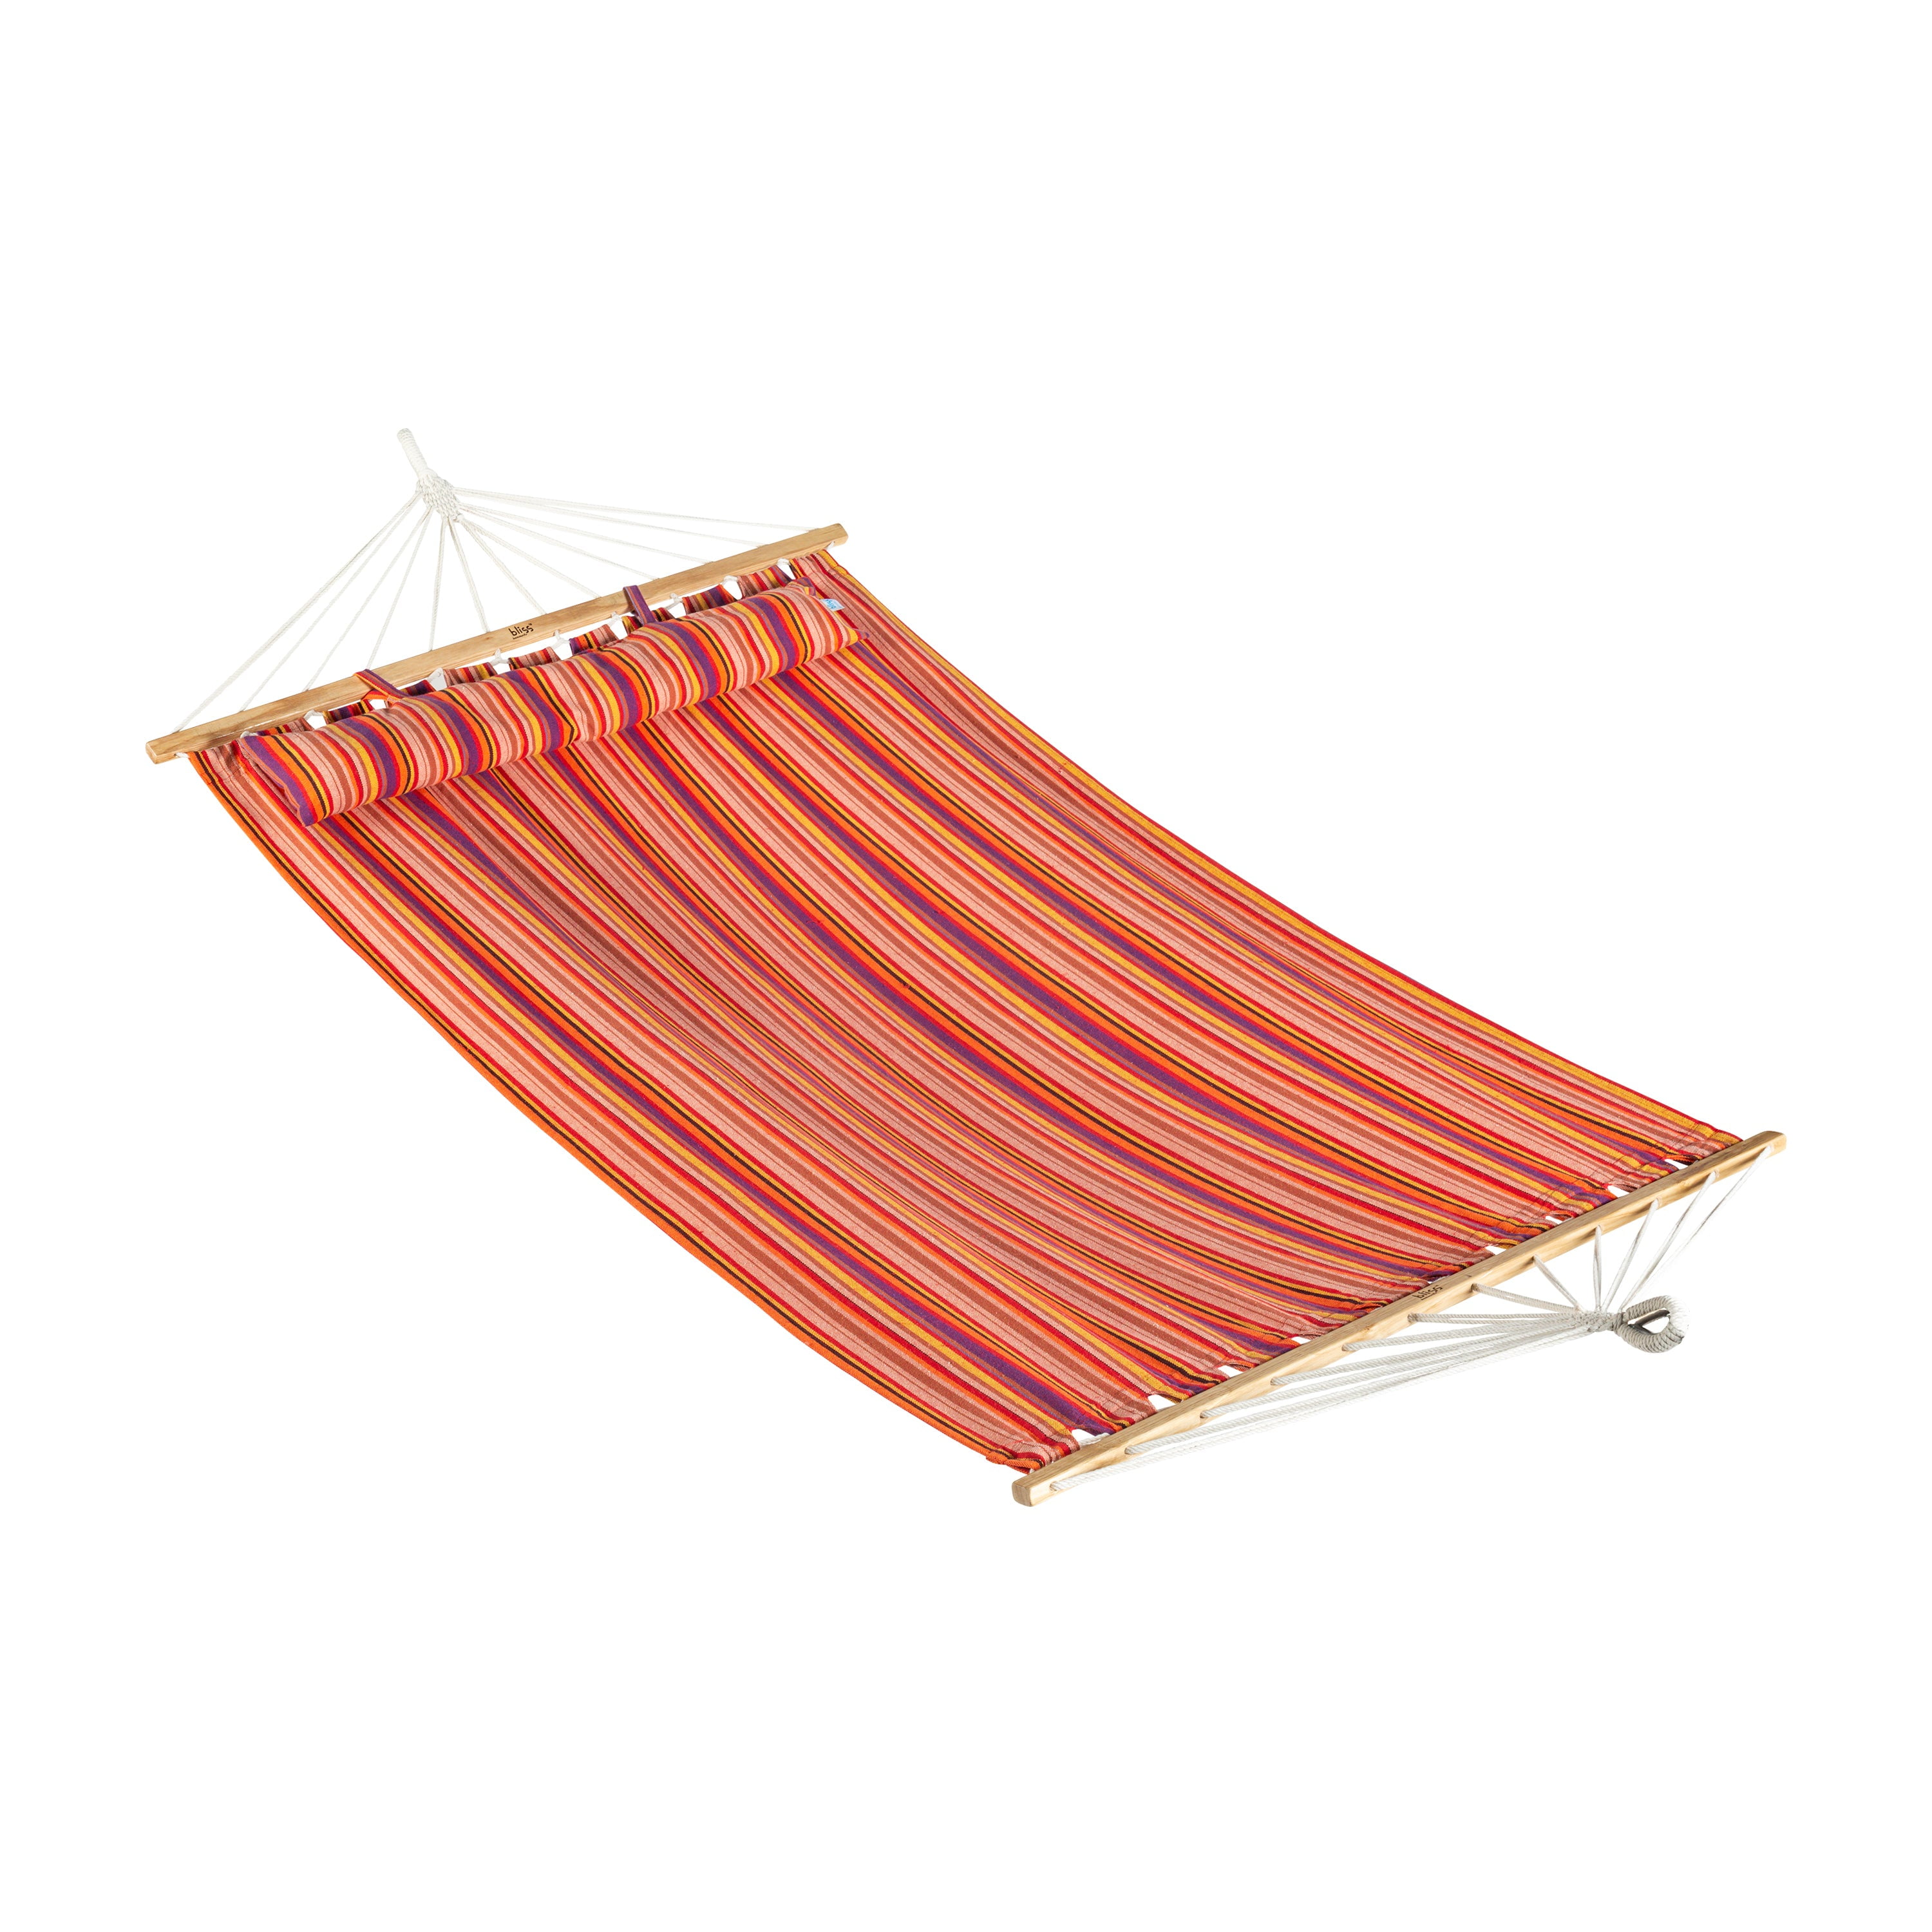 Bliss Oversized Hammock with Pillow - Toasted Almond